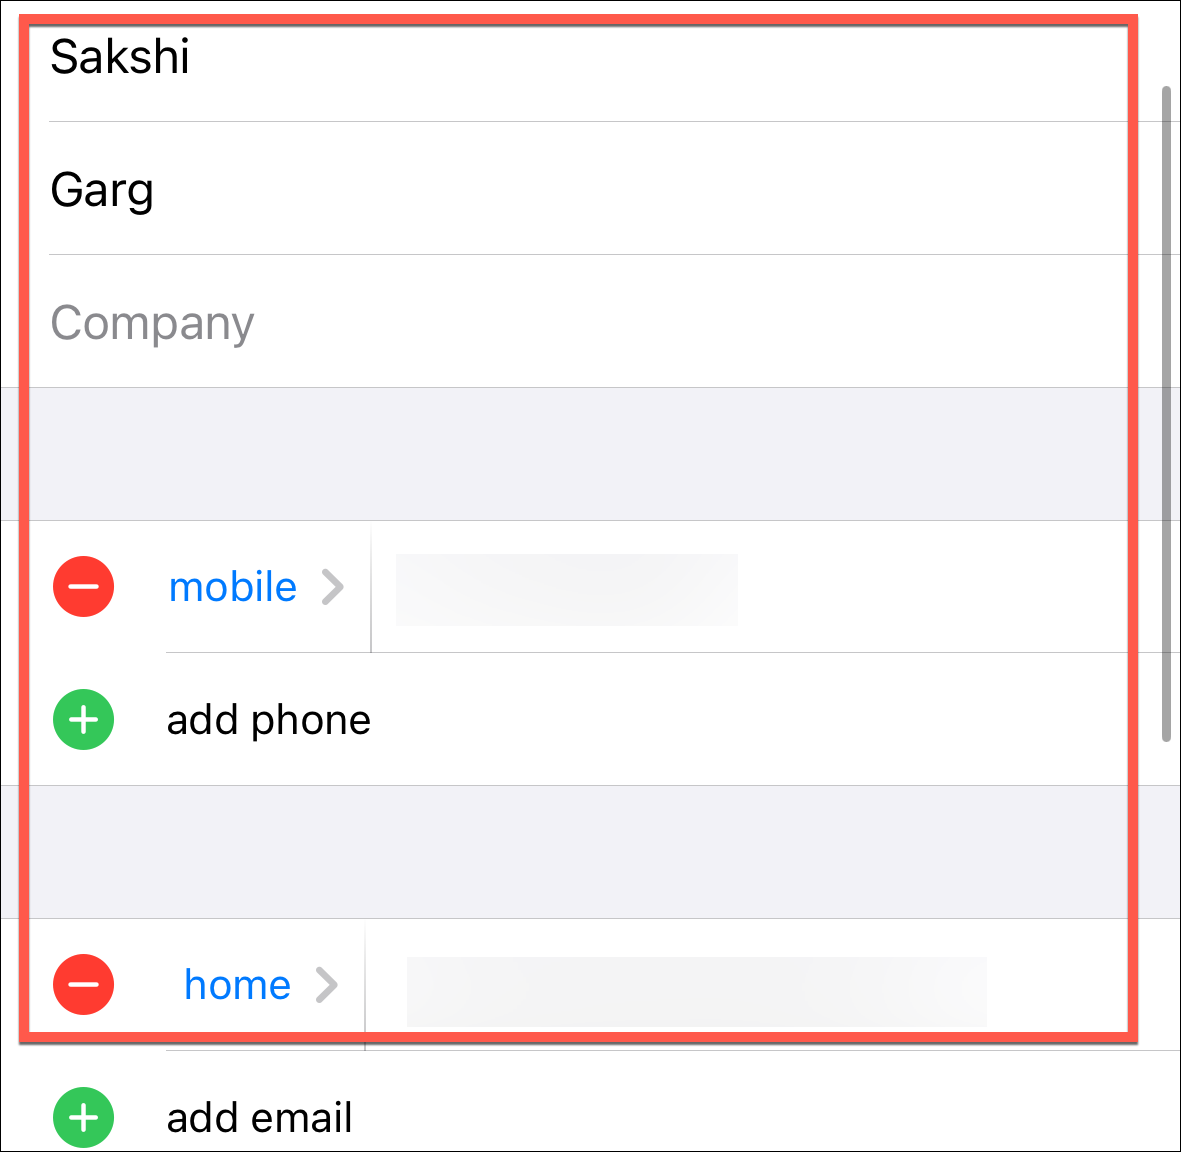 How to Set Up My Card in Contacts on iPhone